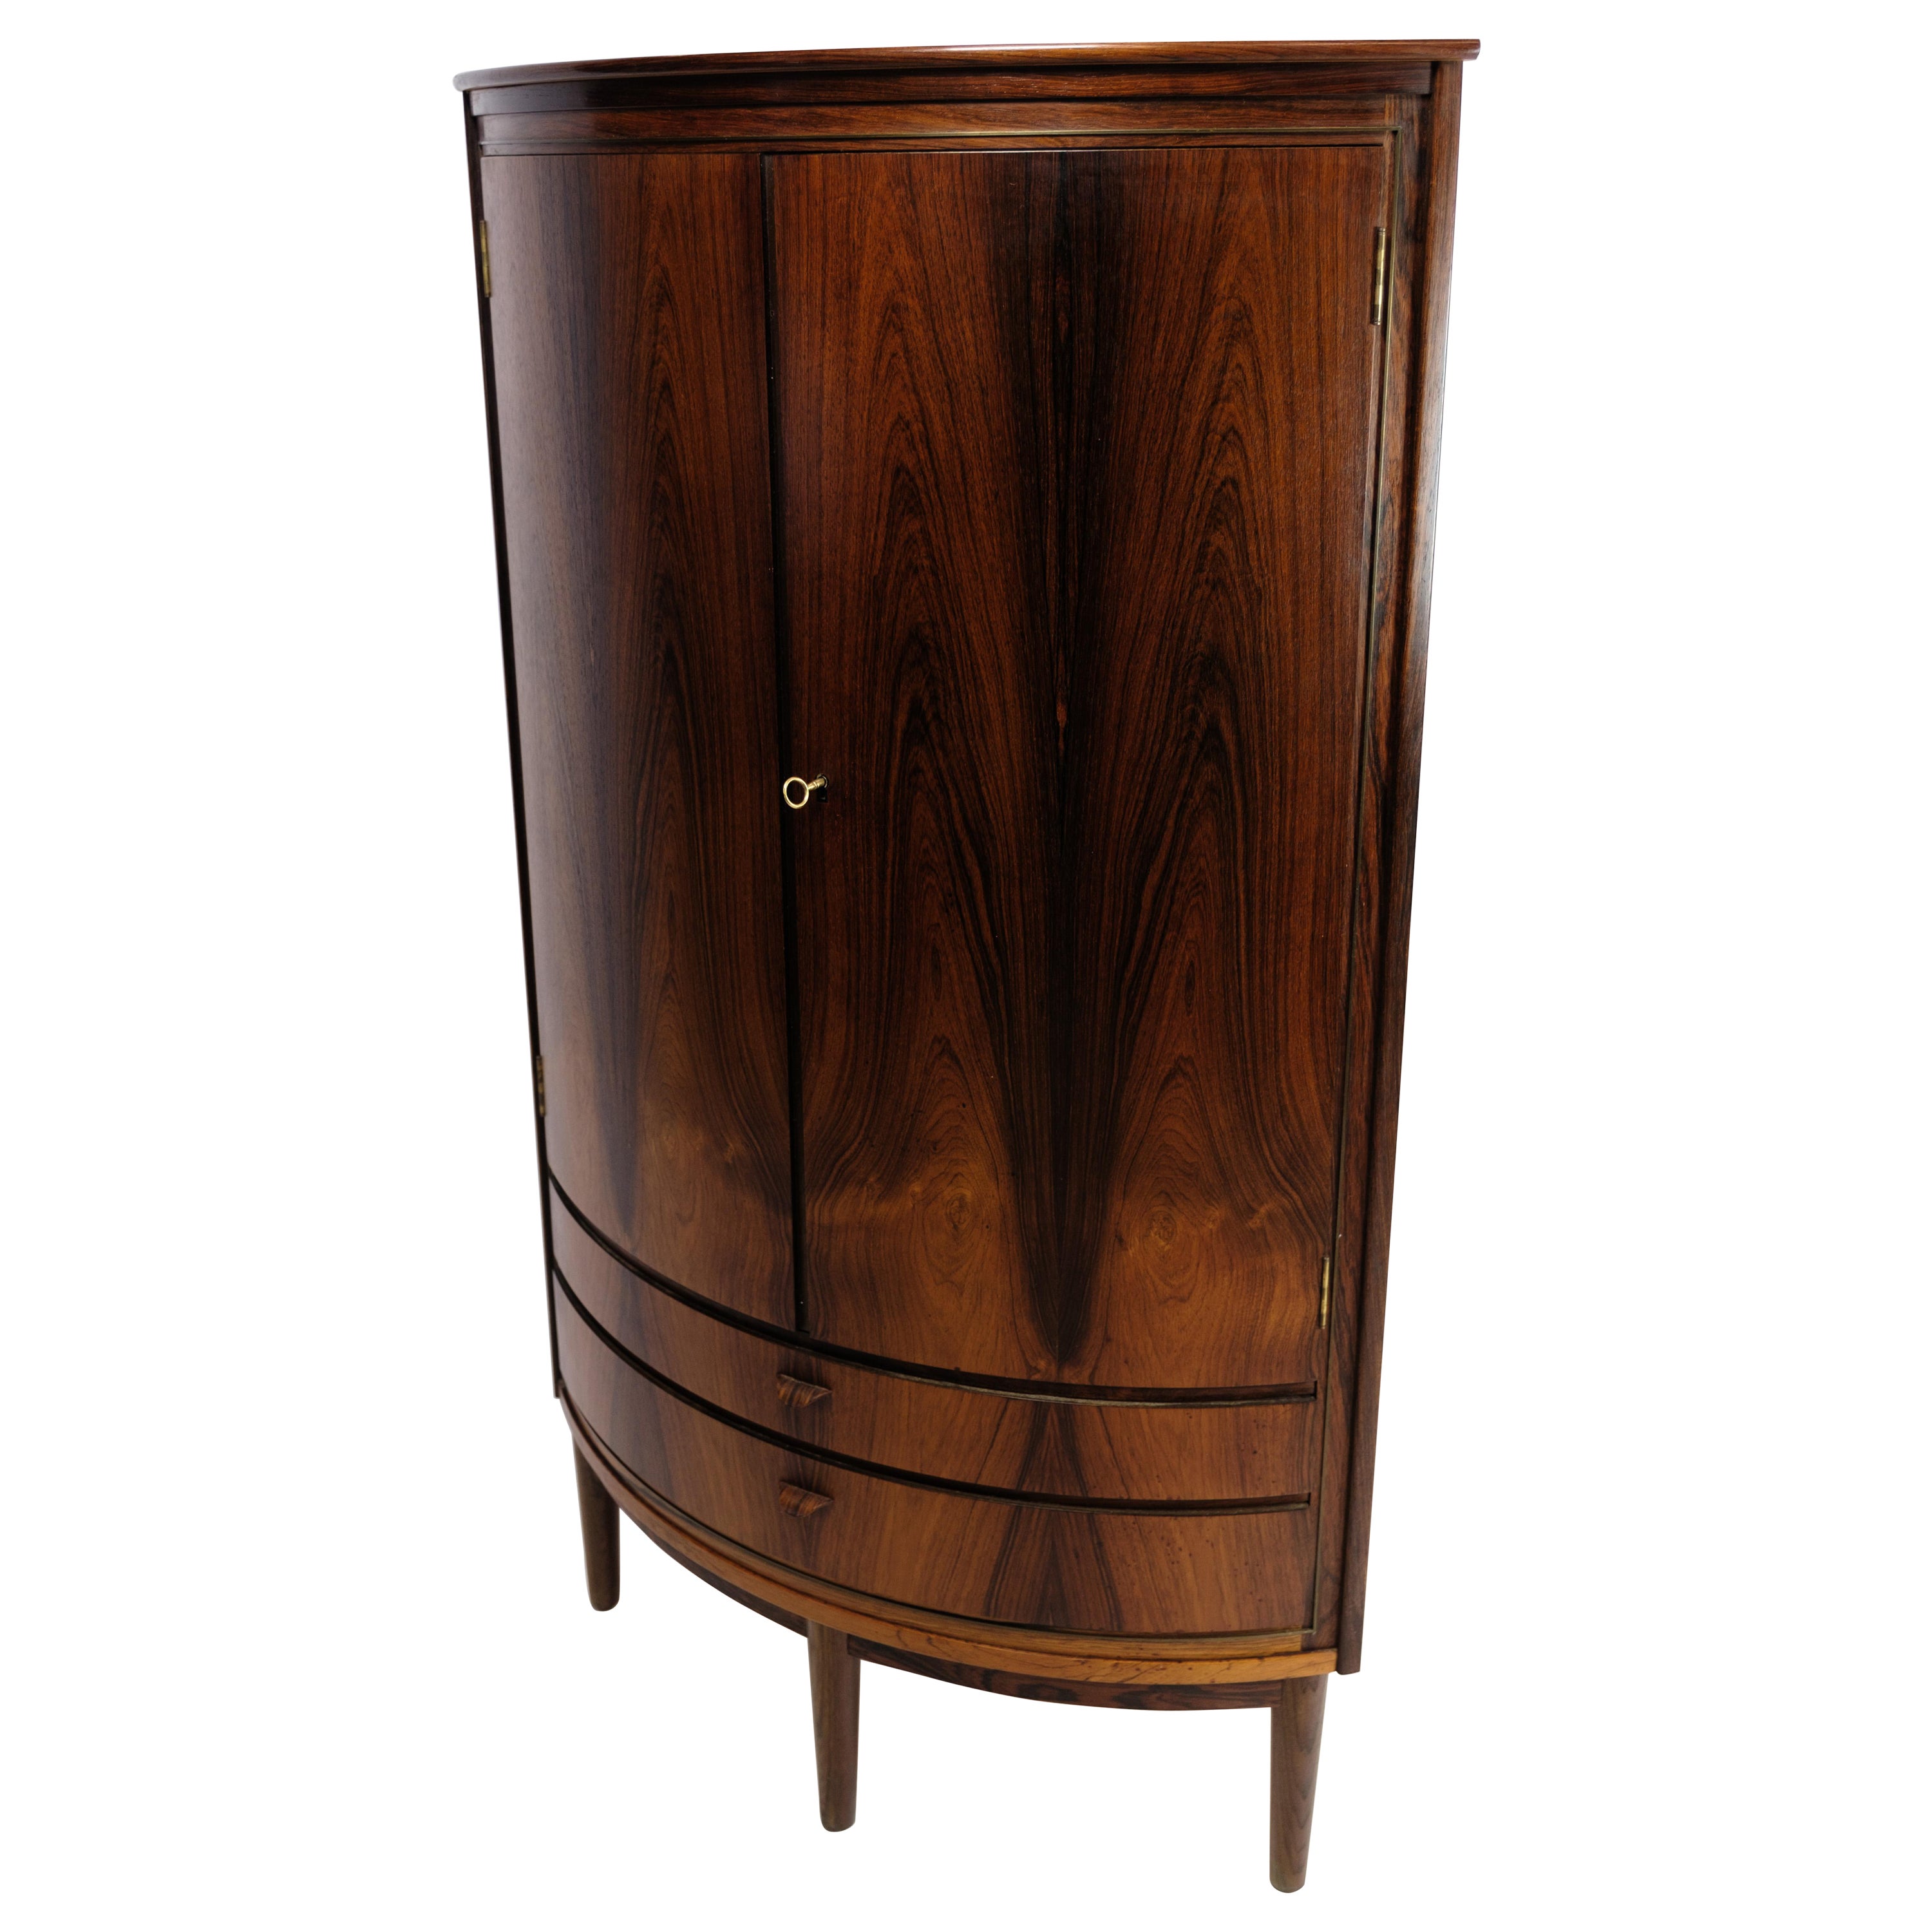 Corner Cabinet Made In Rosewood, Danish Design From 1960s